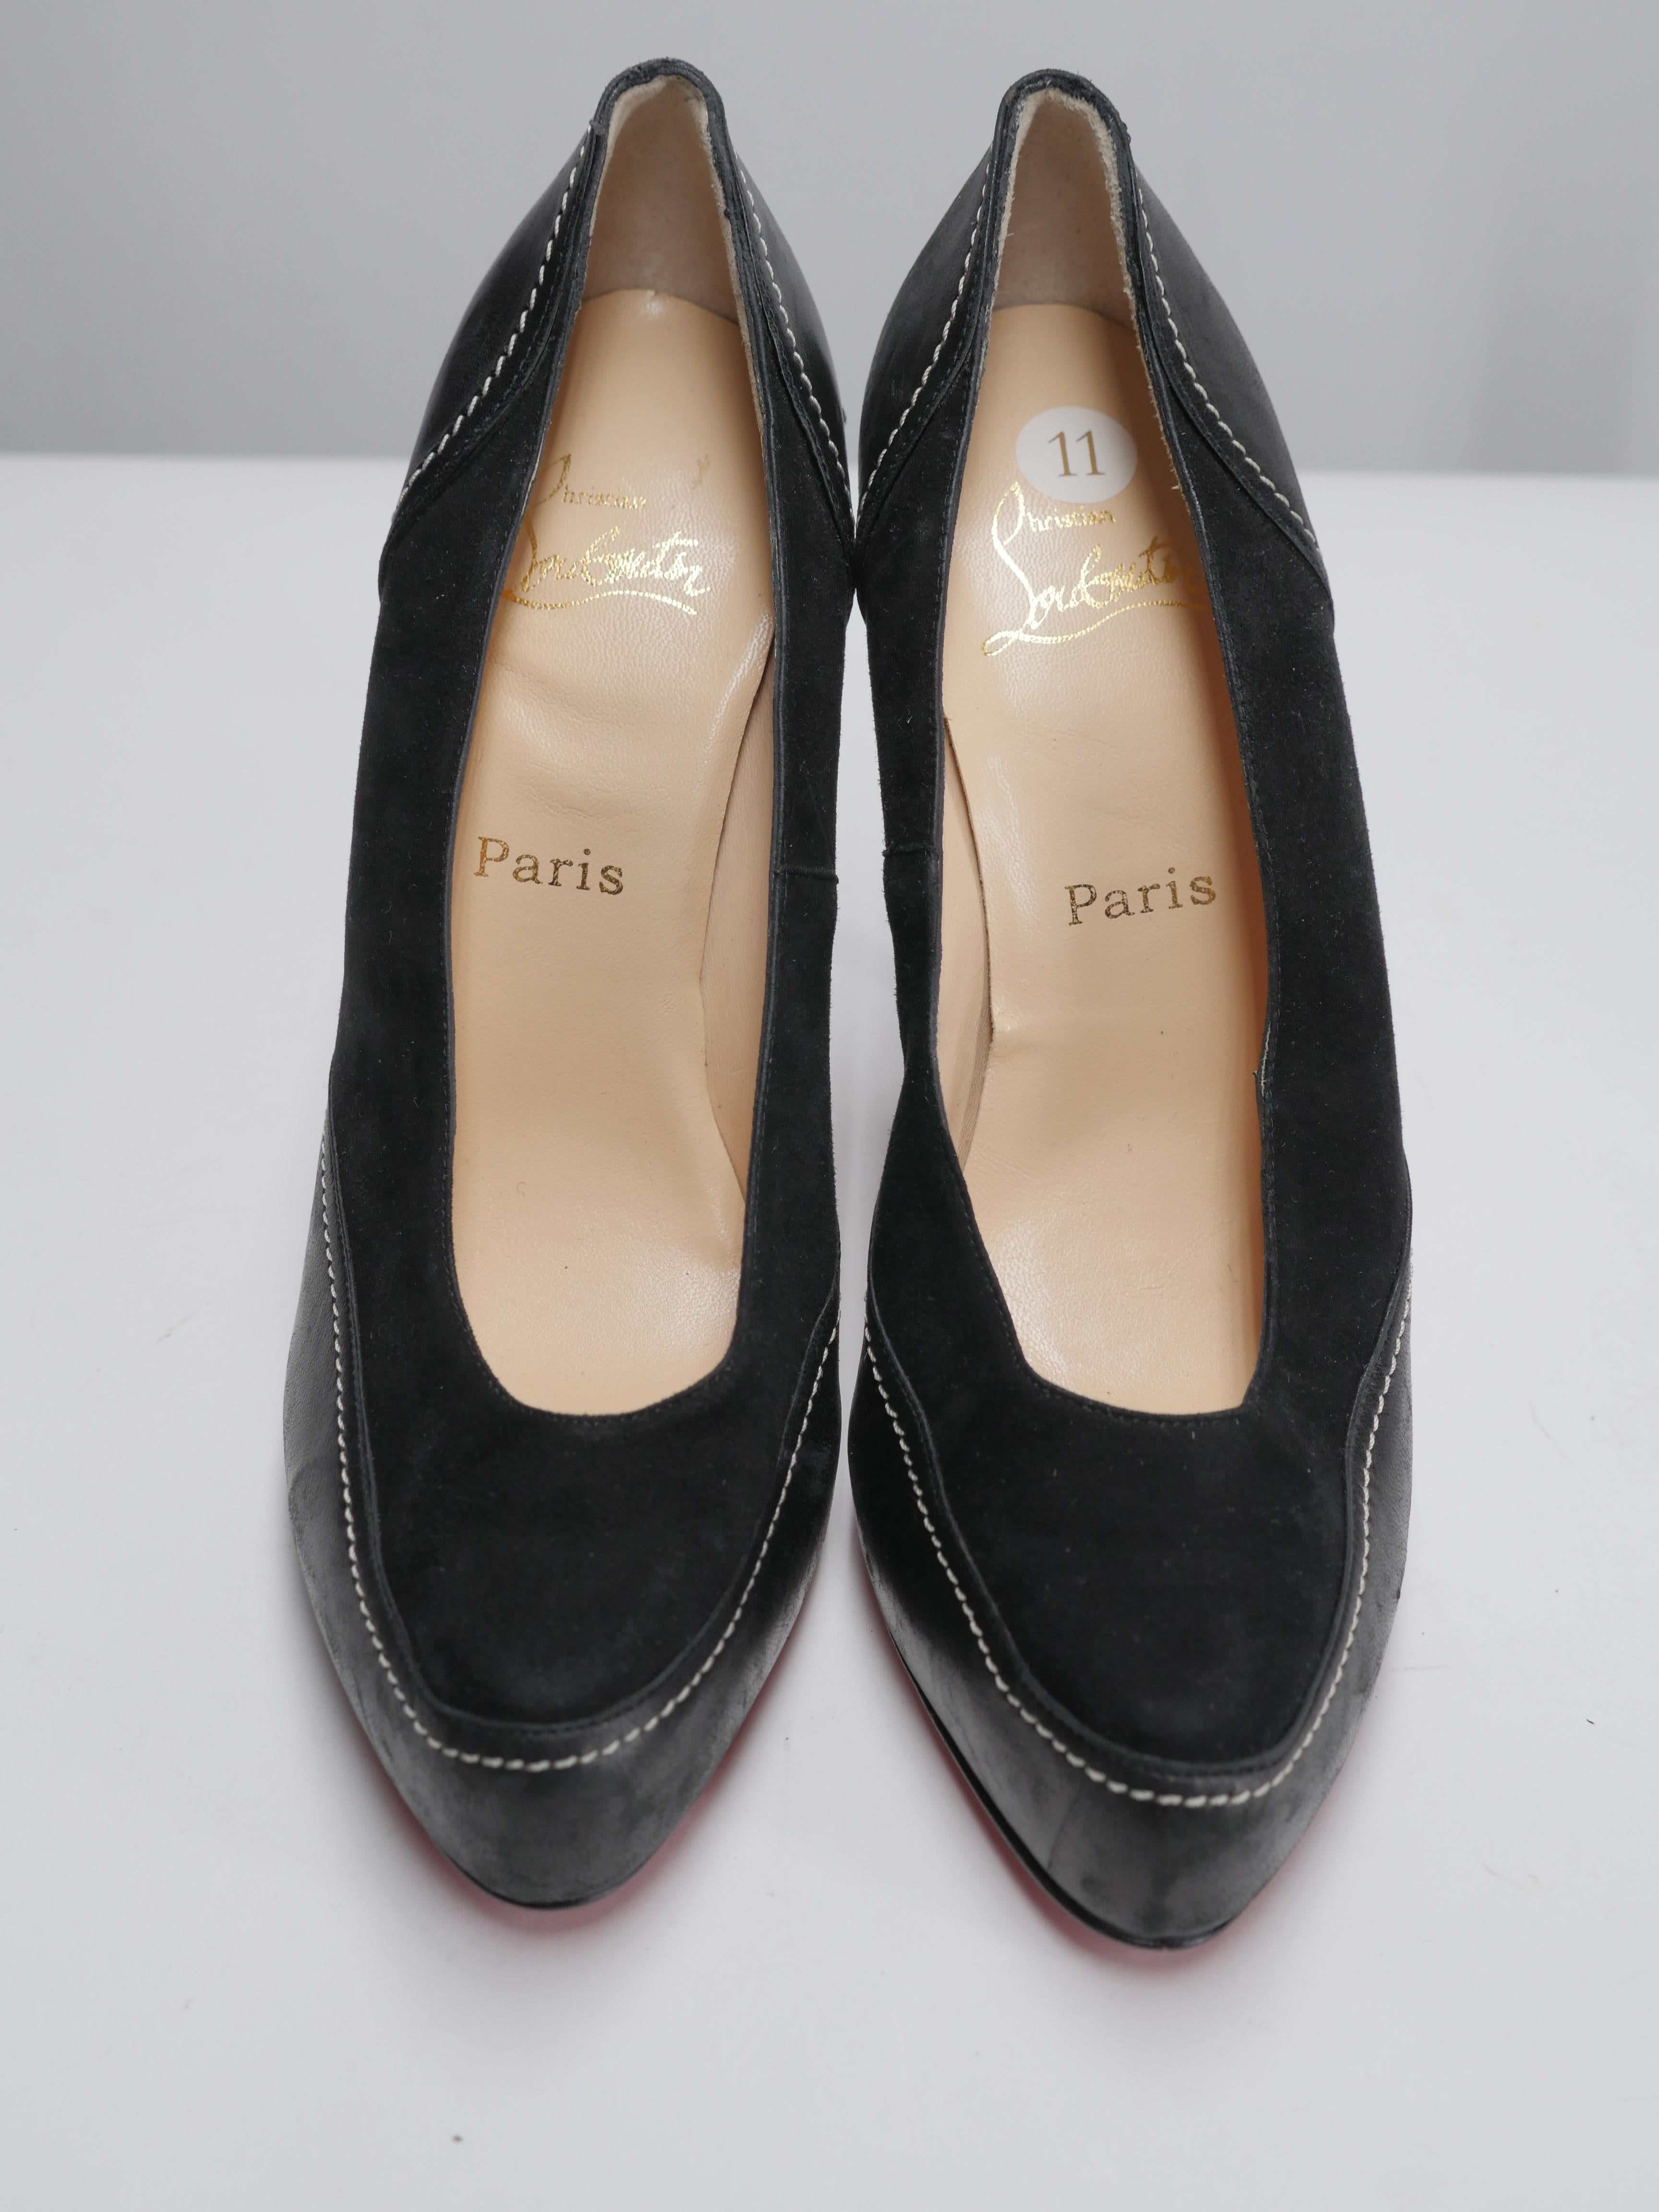 Leather & Suede Pumps w/ White Stitching Detail